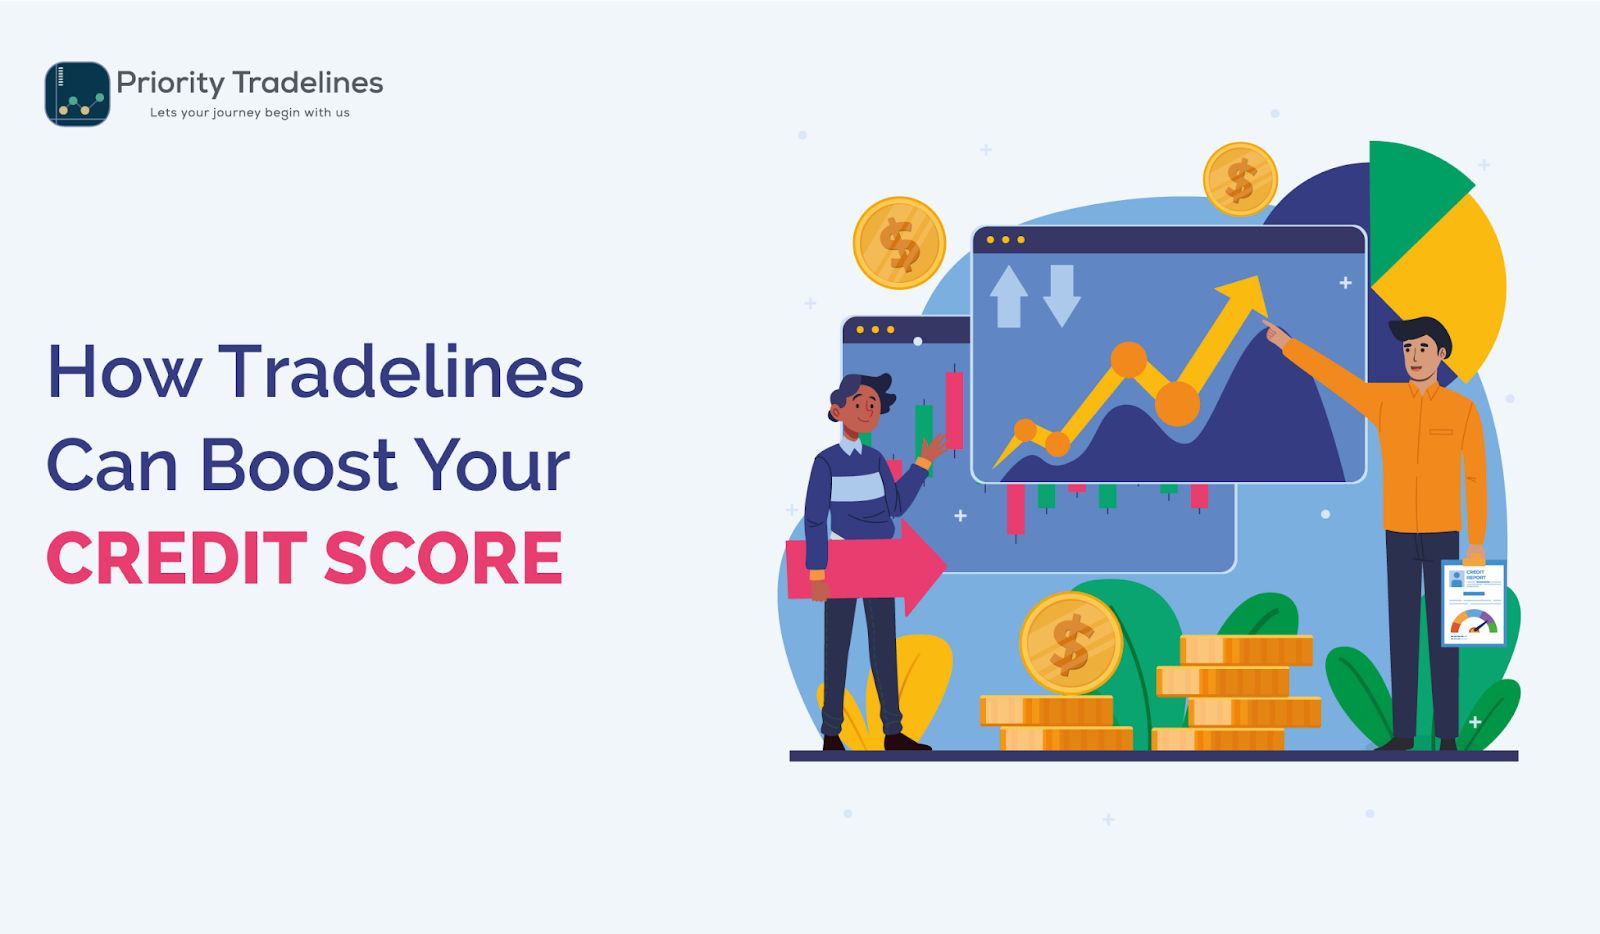 How Tradelines Can Boost Your Credit Score